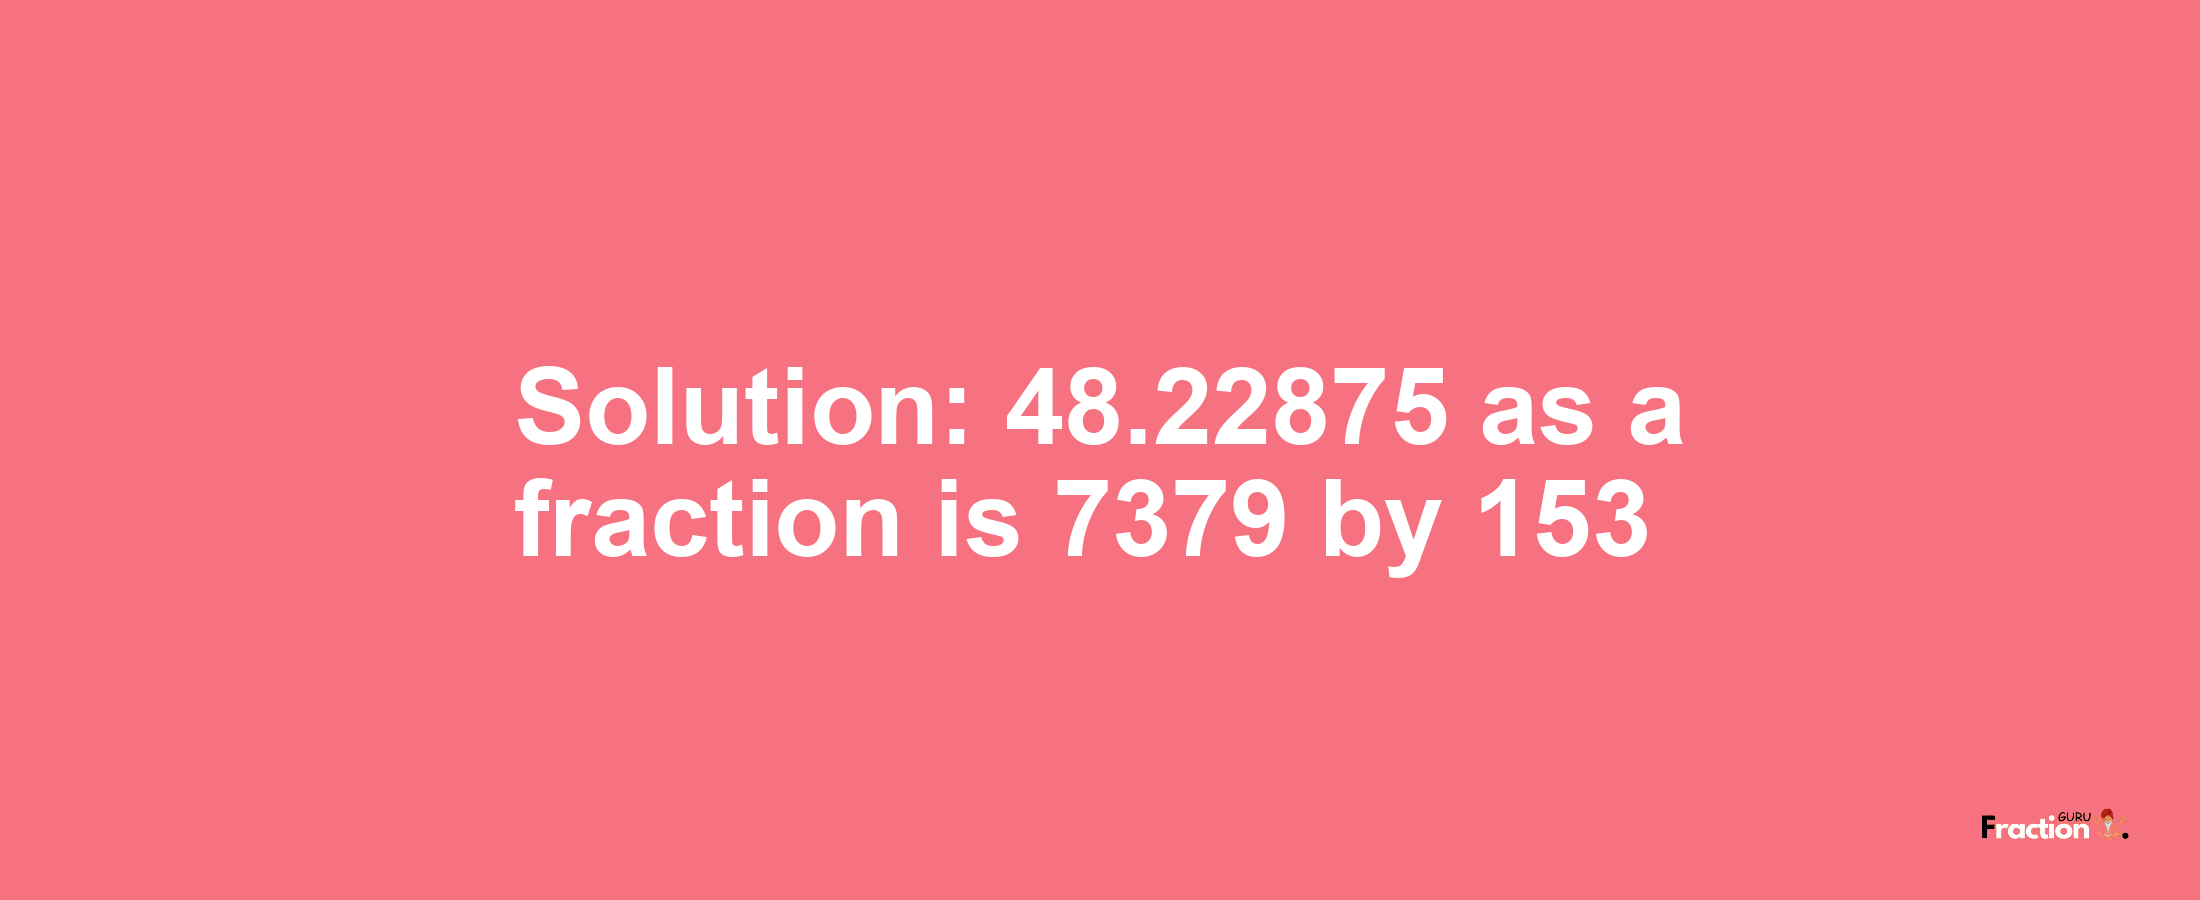 Solution:48.22875 as a fraction is 7379/153